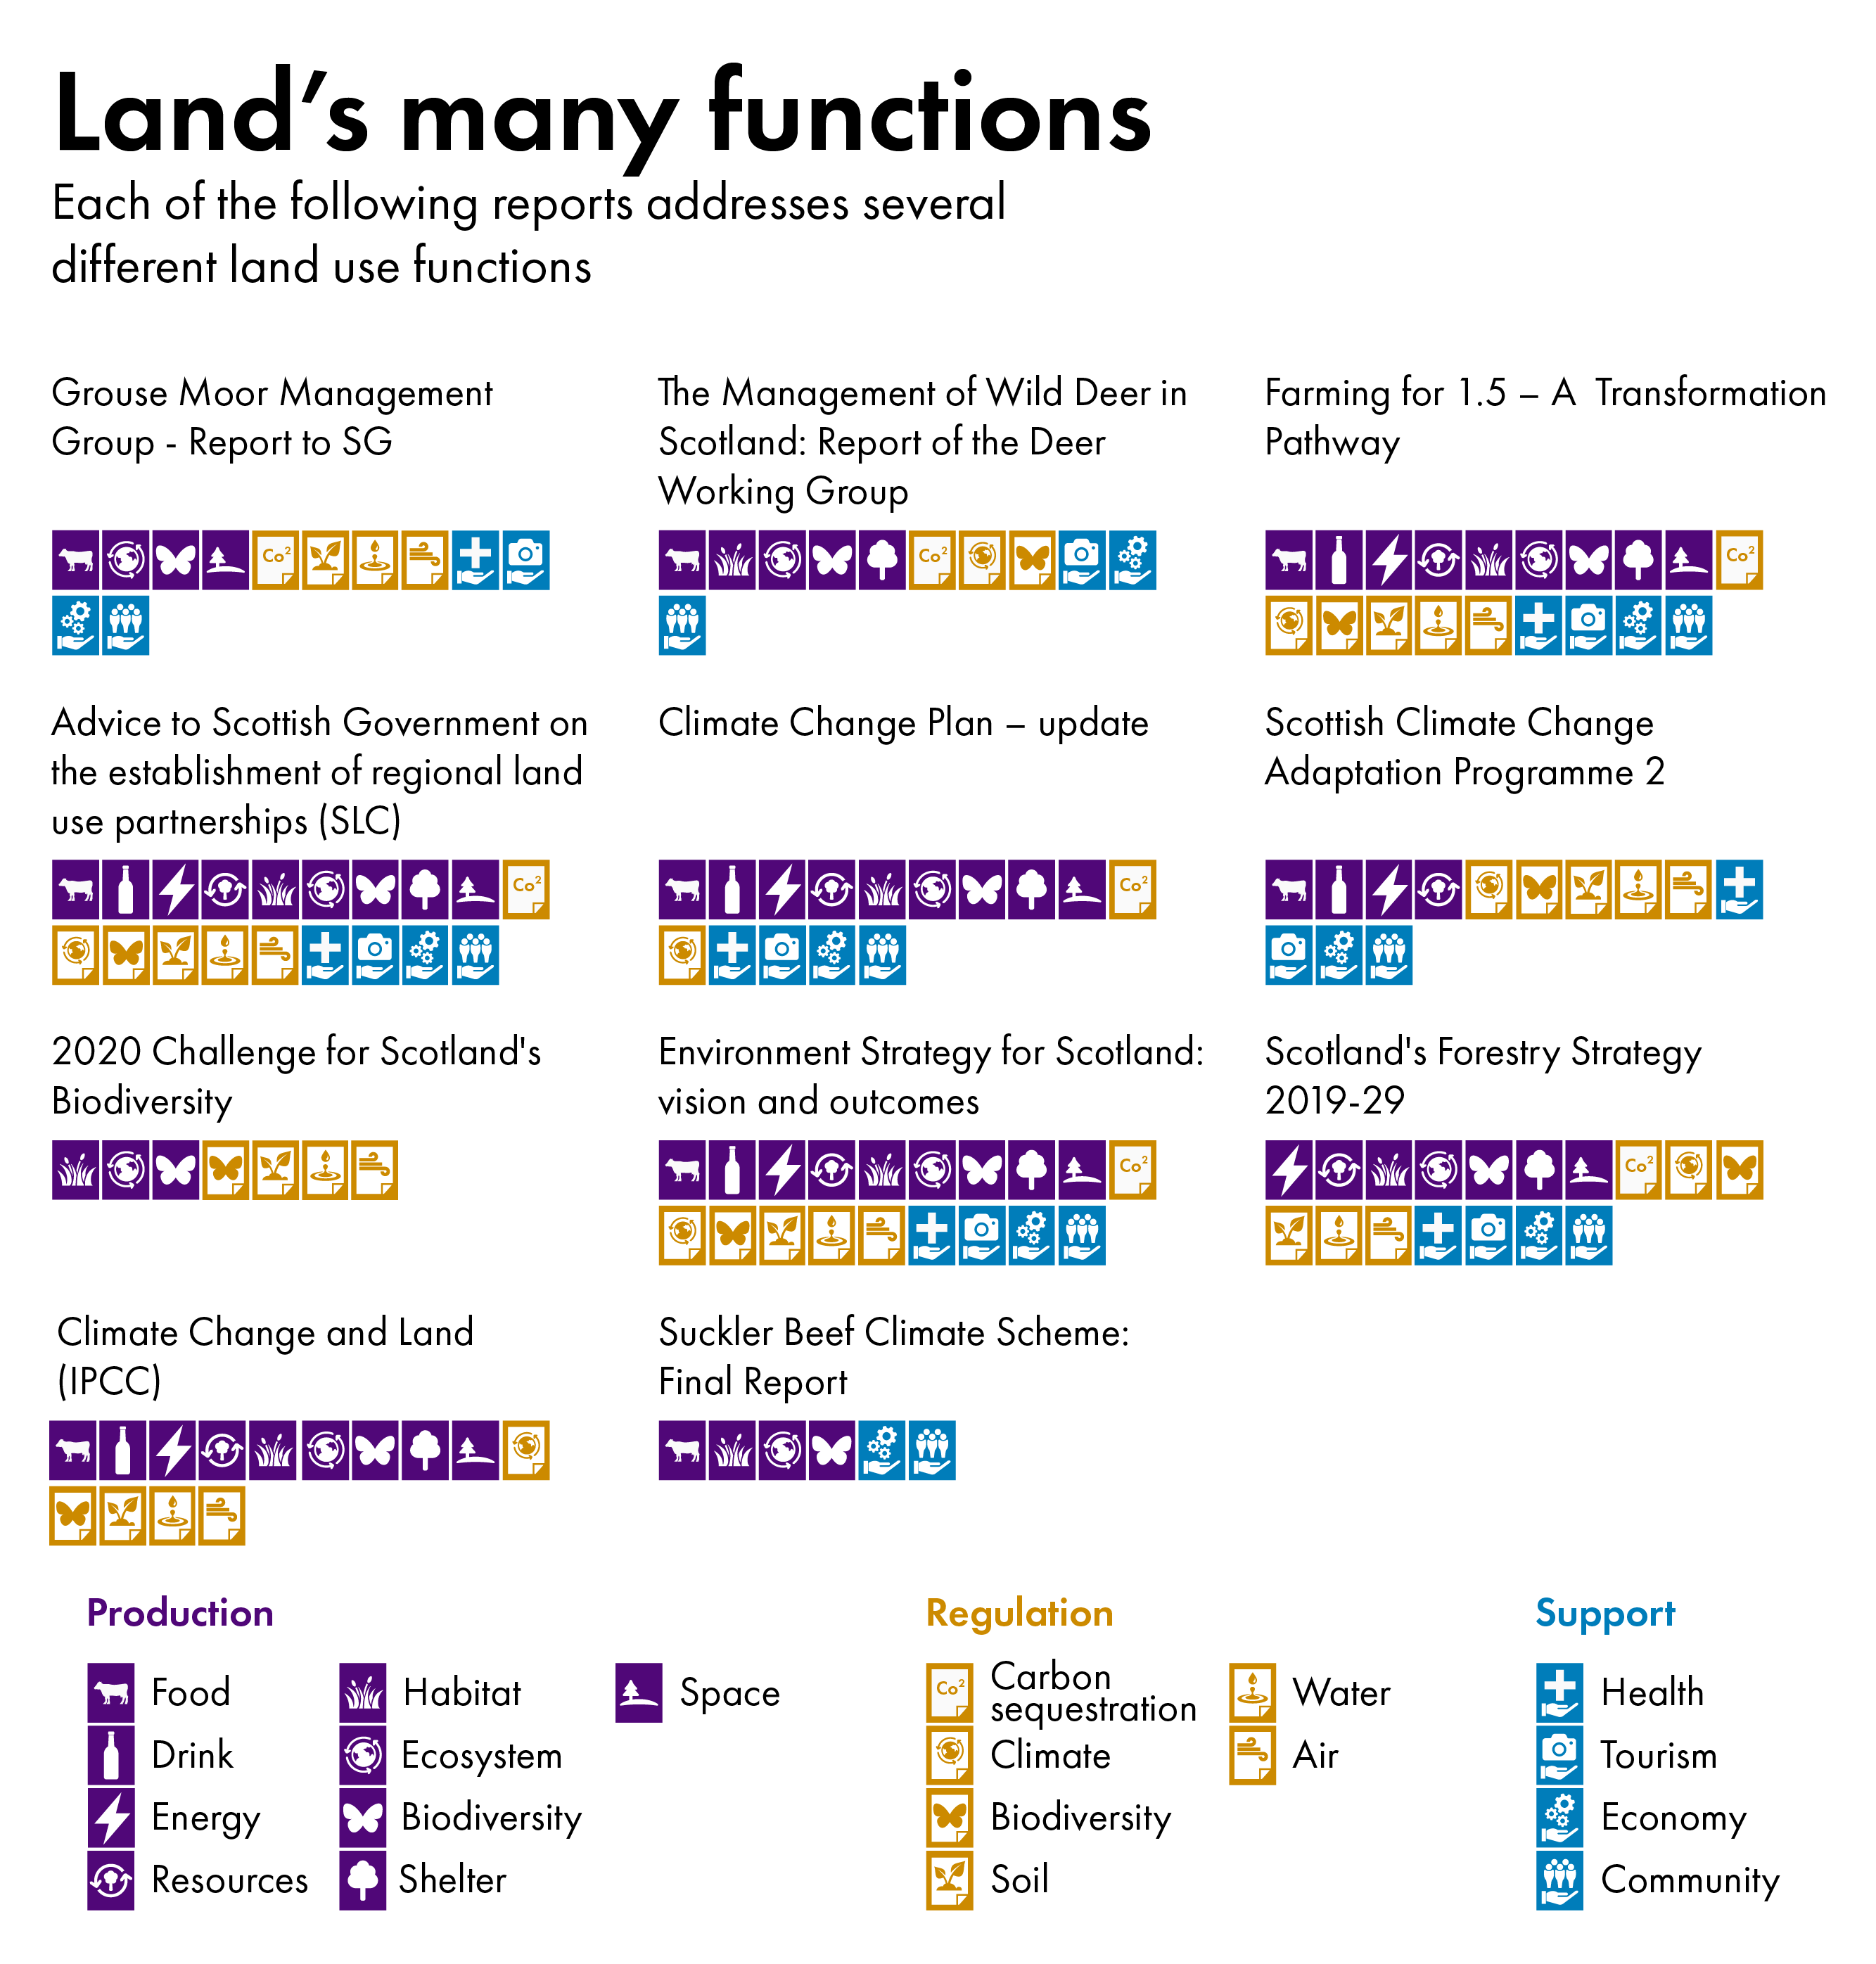 Using three different groups of symbols, the infographic shows where reference was found in selected documents to land use functions that are productive, regulatory or supporting services.